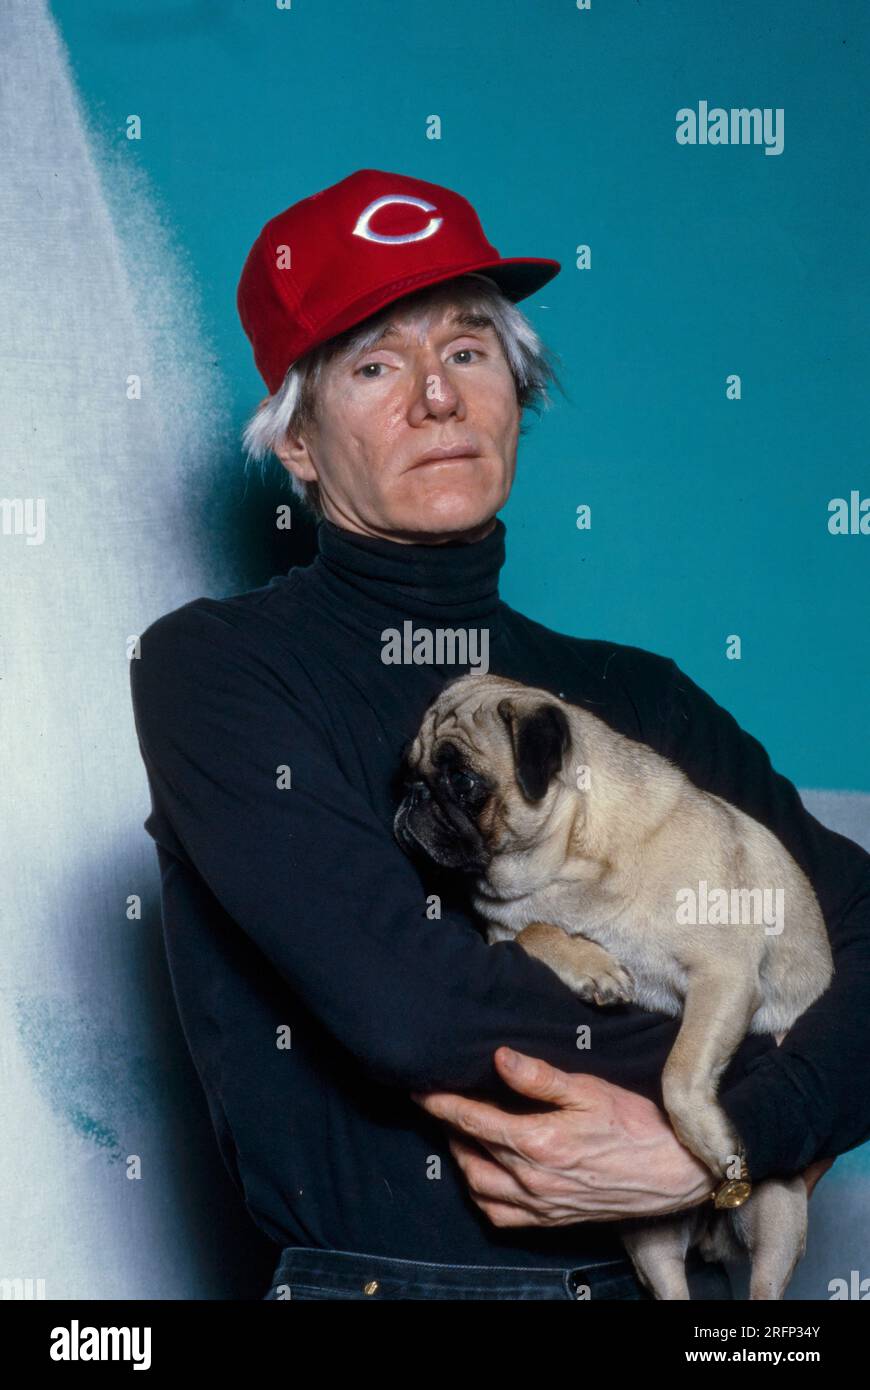 Andy Warhol poses wearing Cincinnati Reds baseball cap while holding pug breed dog in 1982. Warhol was an American visual artist, film director, producer, and leading figure in the pop art movement. His works explore the relationship between artistic expression, advertising, and celebrity culture that flourished by the 1960s, and span a variety of media, including painting, silkscreening, photography, film, and sculpture. Some of his best-known works include the silkscreen paintings Campbell's Soup Cans  and Marilyn Diptych. Photo by Bernard Gotfryd Stock Photo